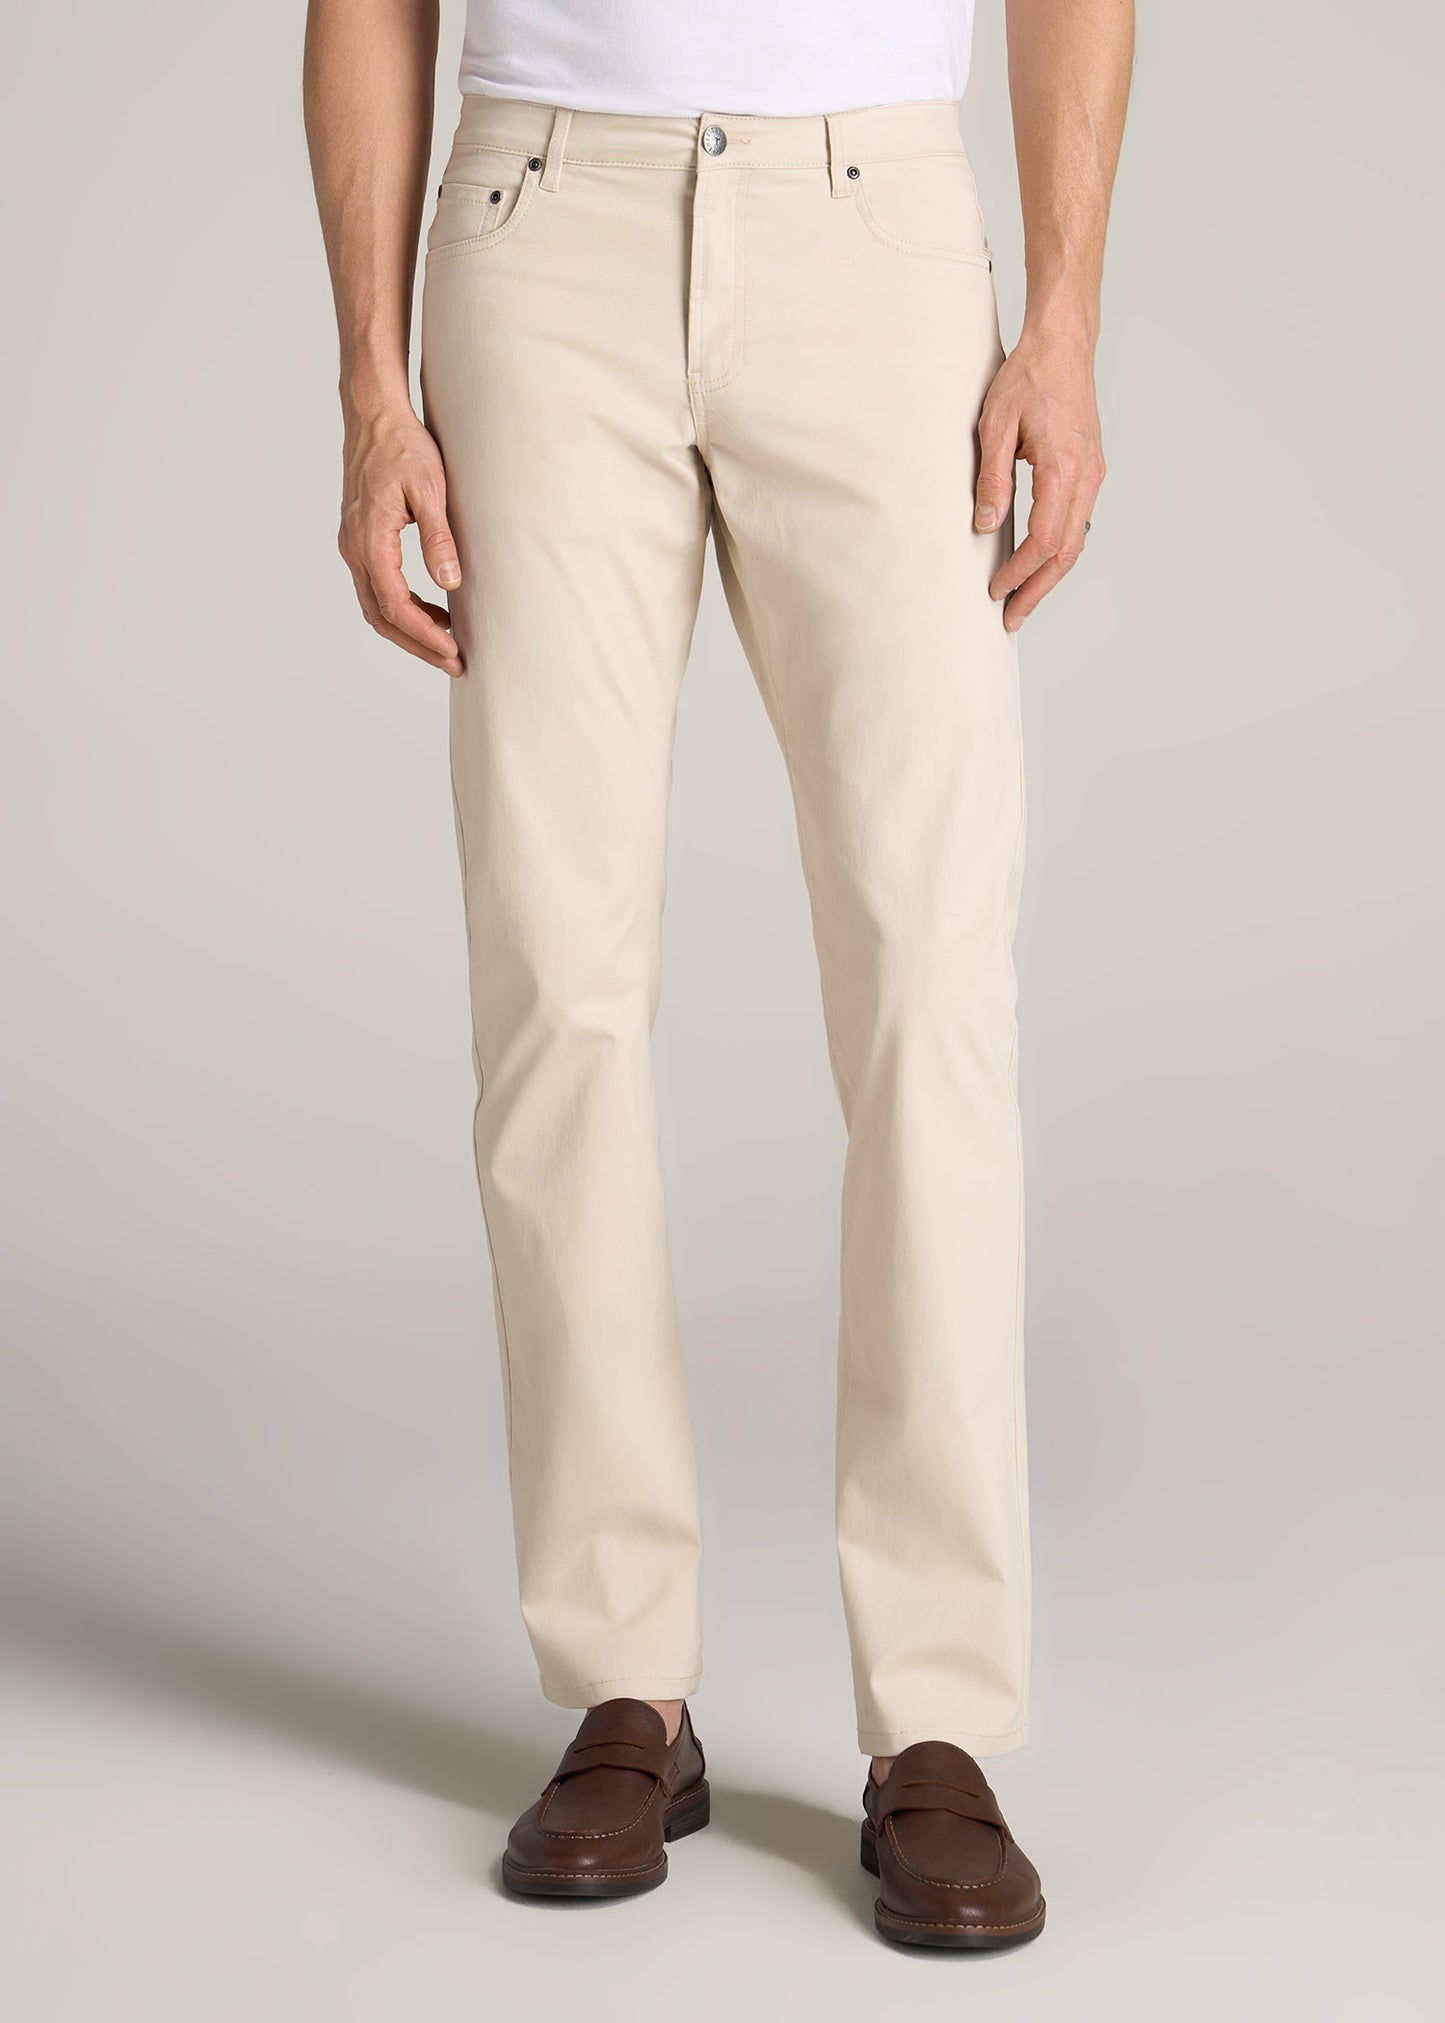 Old Navy Wow Straight FivePocket Pants for Men  Southcentre Mall